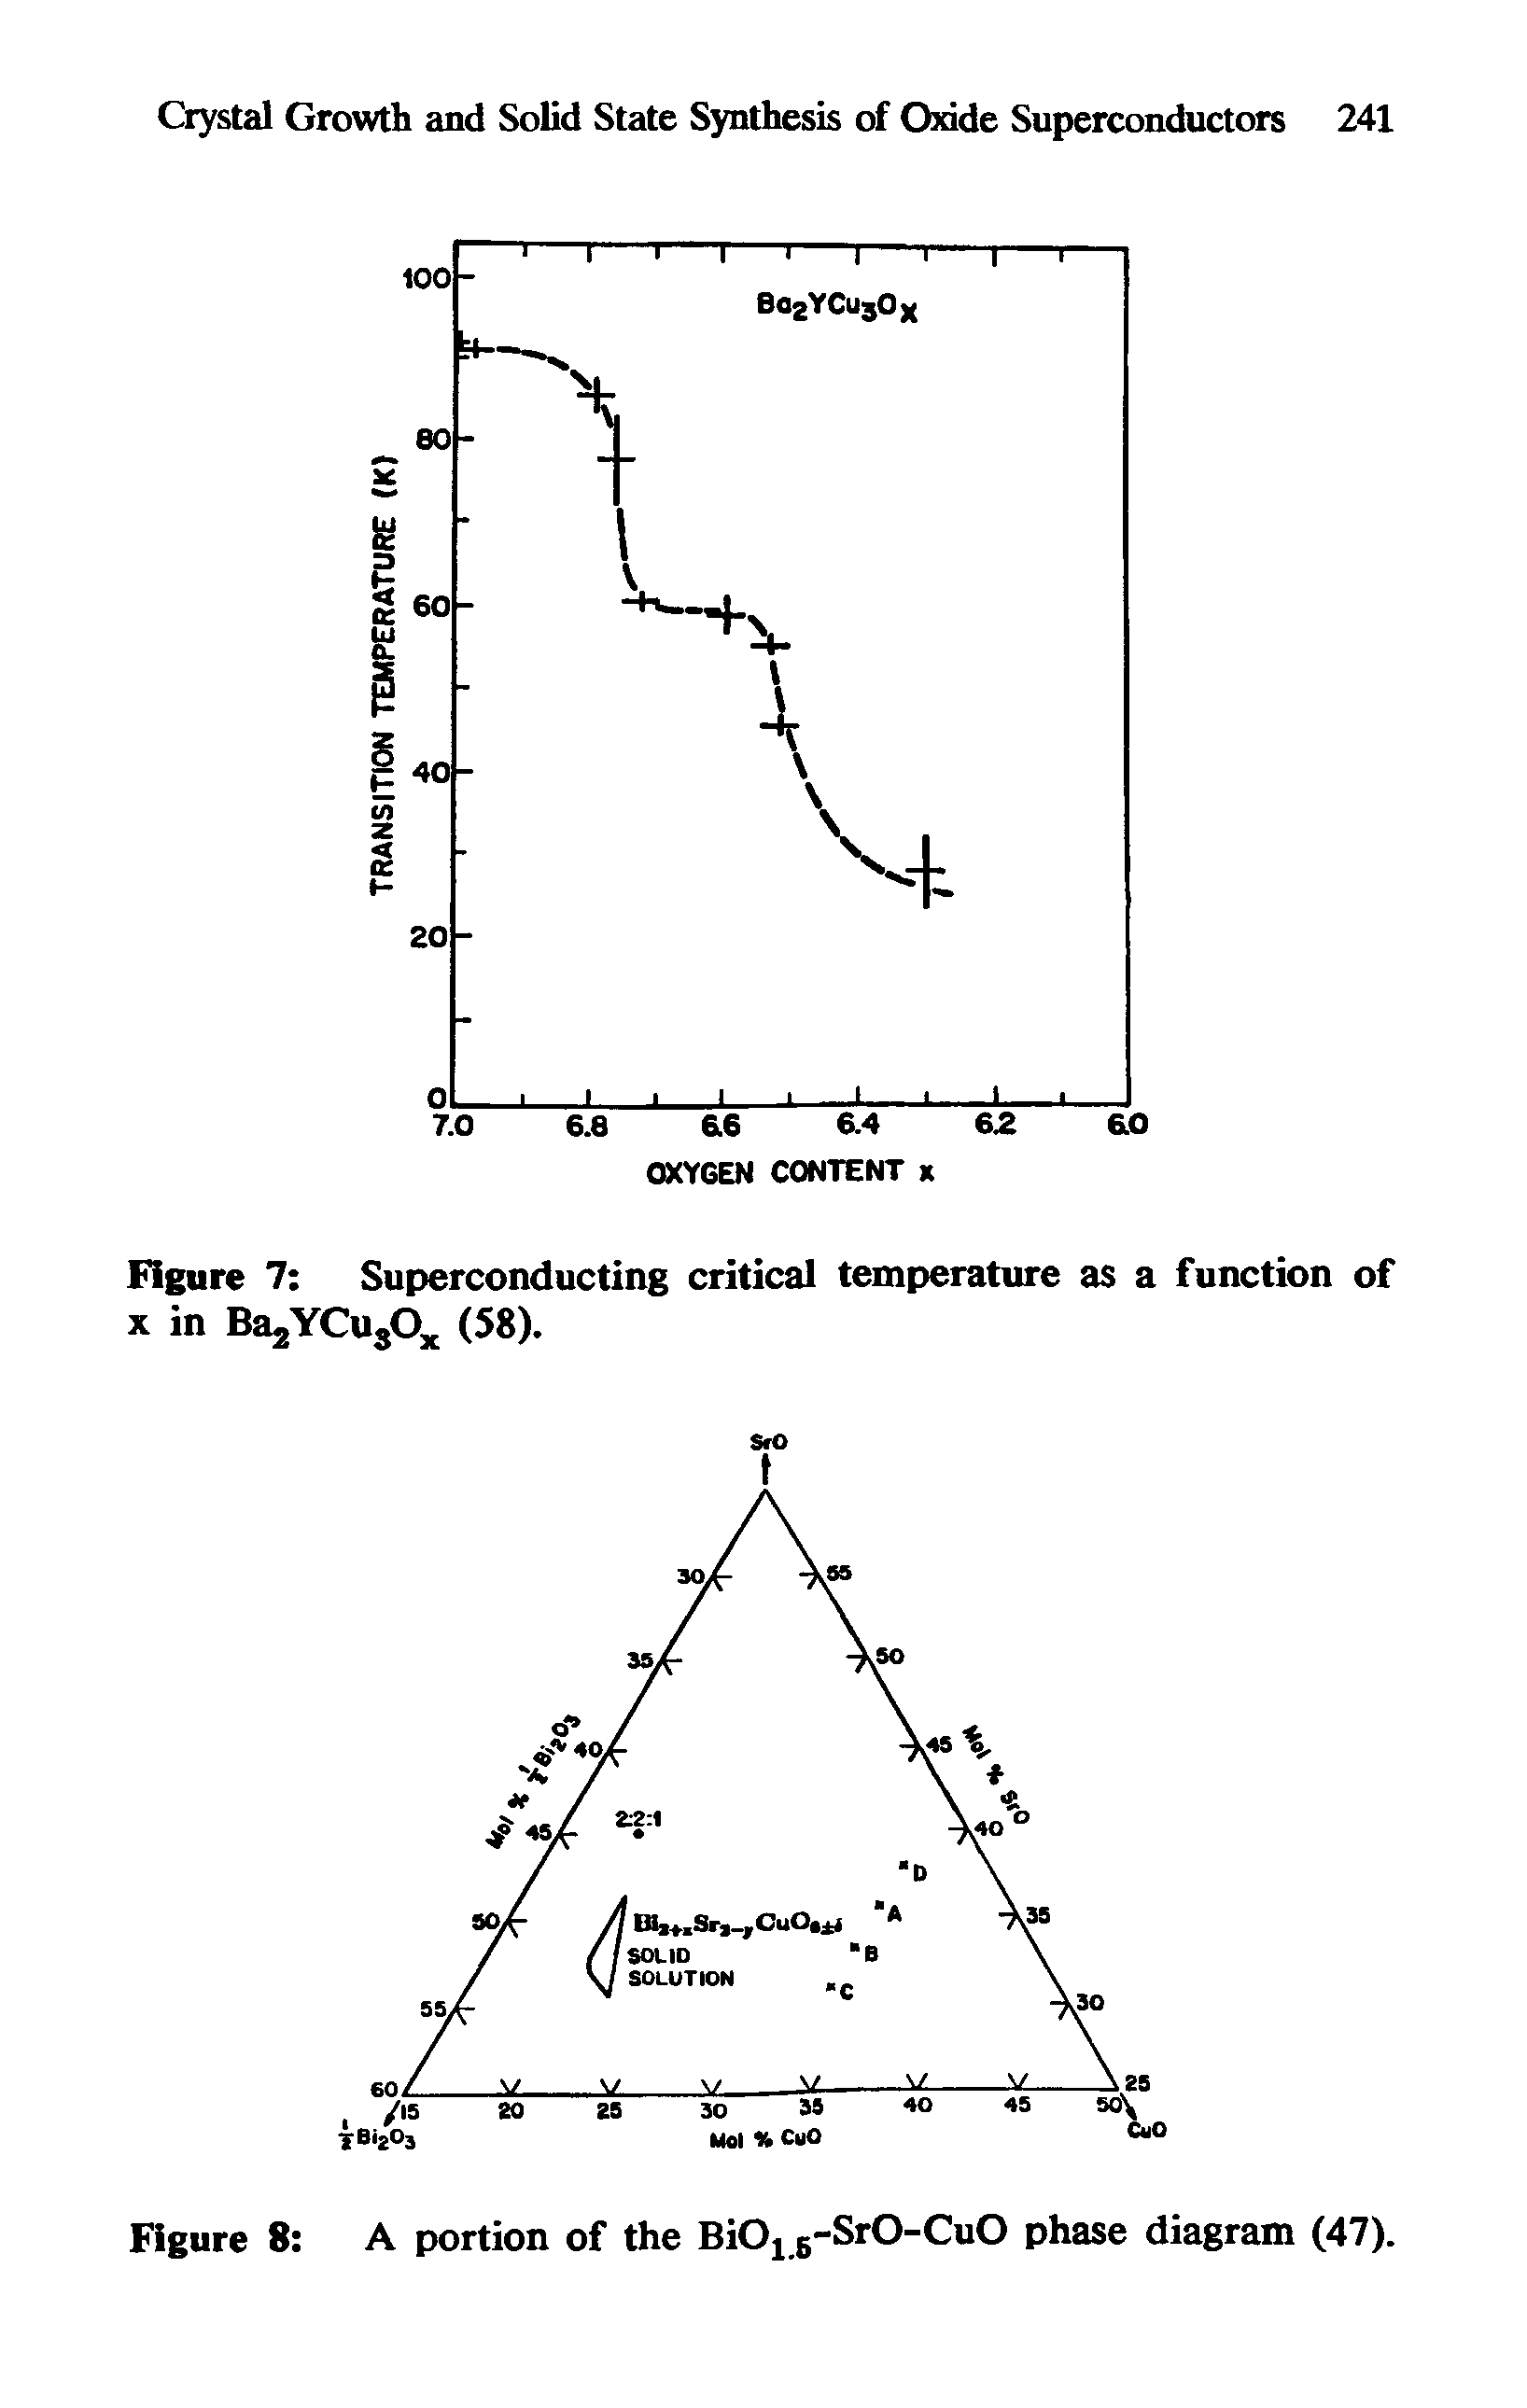 Figure 7 Superconducting critical temperature as a function of x in Ba2YCusOx (58).